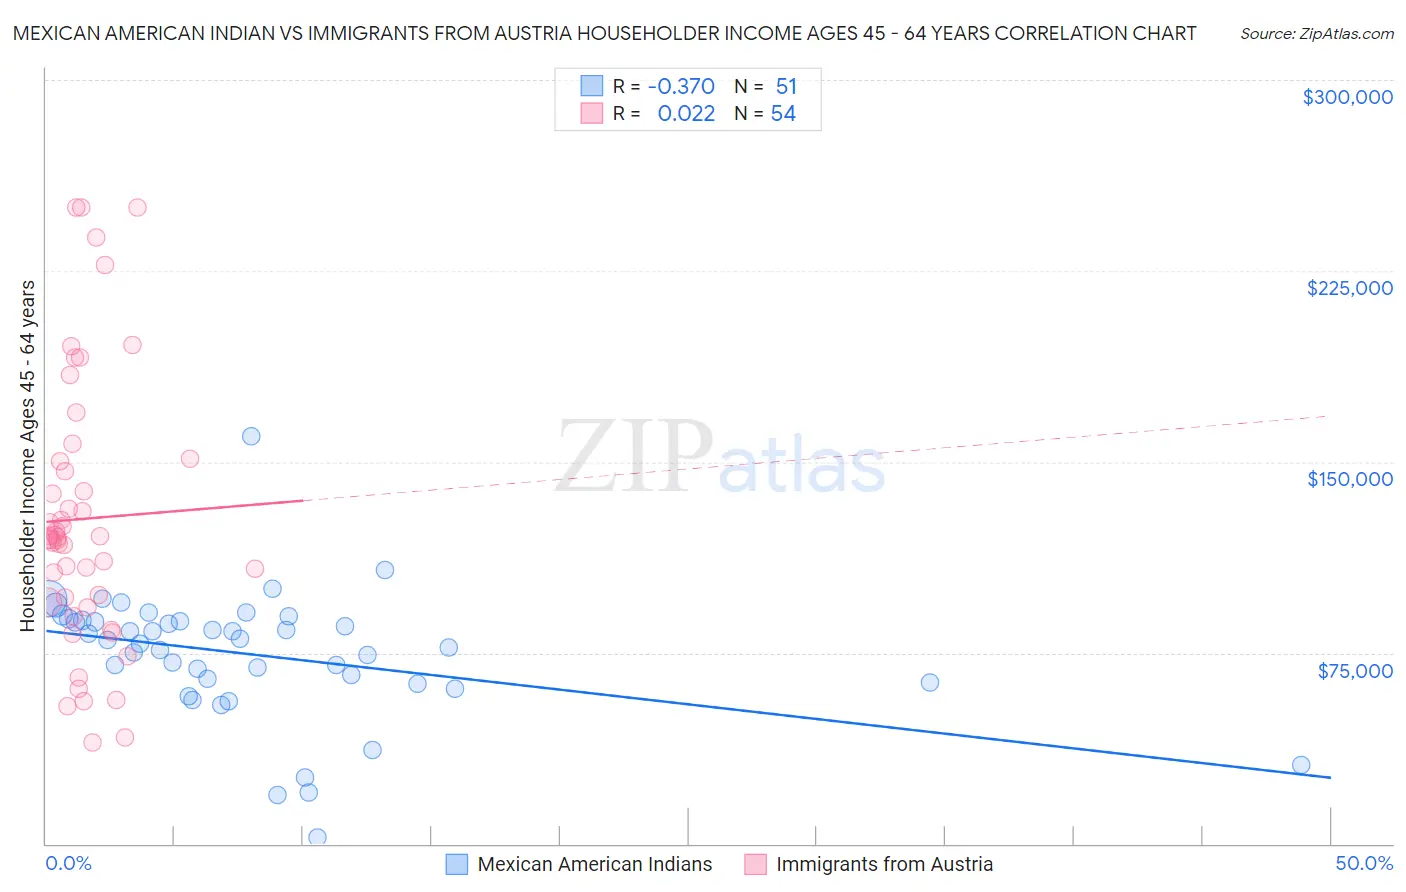 Mexican American Indian vs Immigrants from Austria Householder Income Ages 45 - 64 years